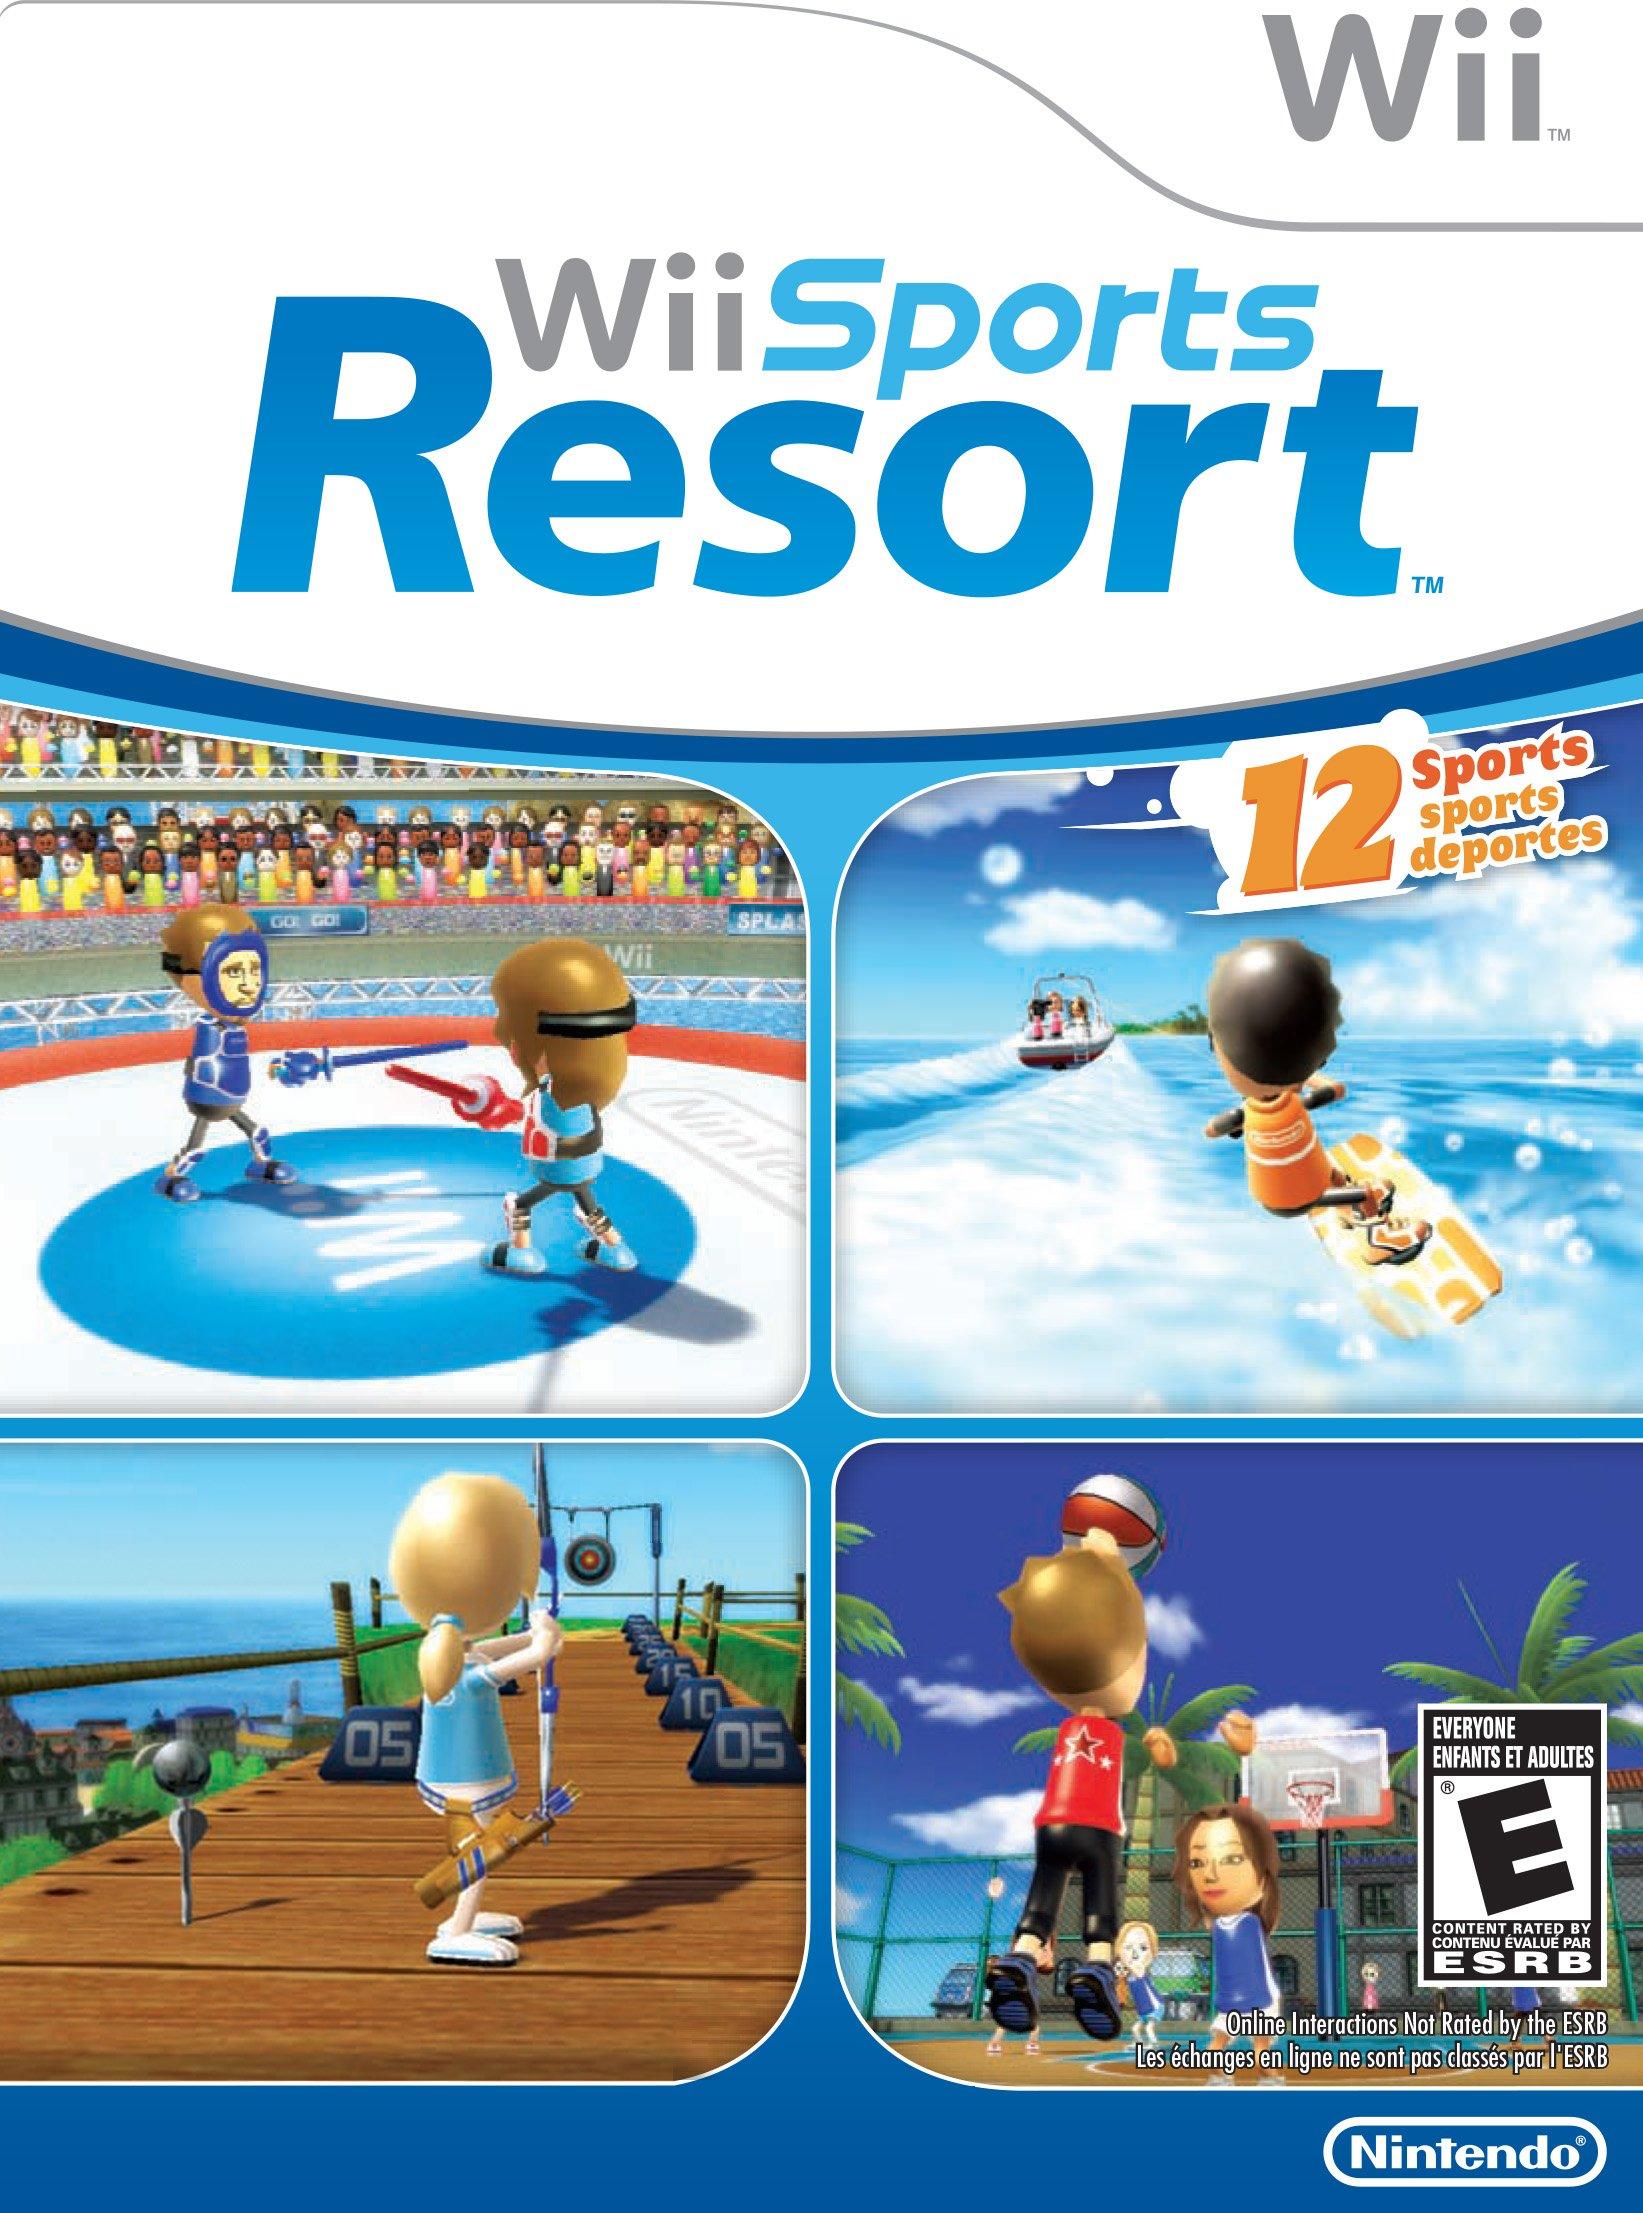 where to buy cheap wii games